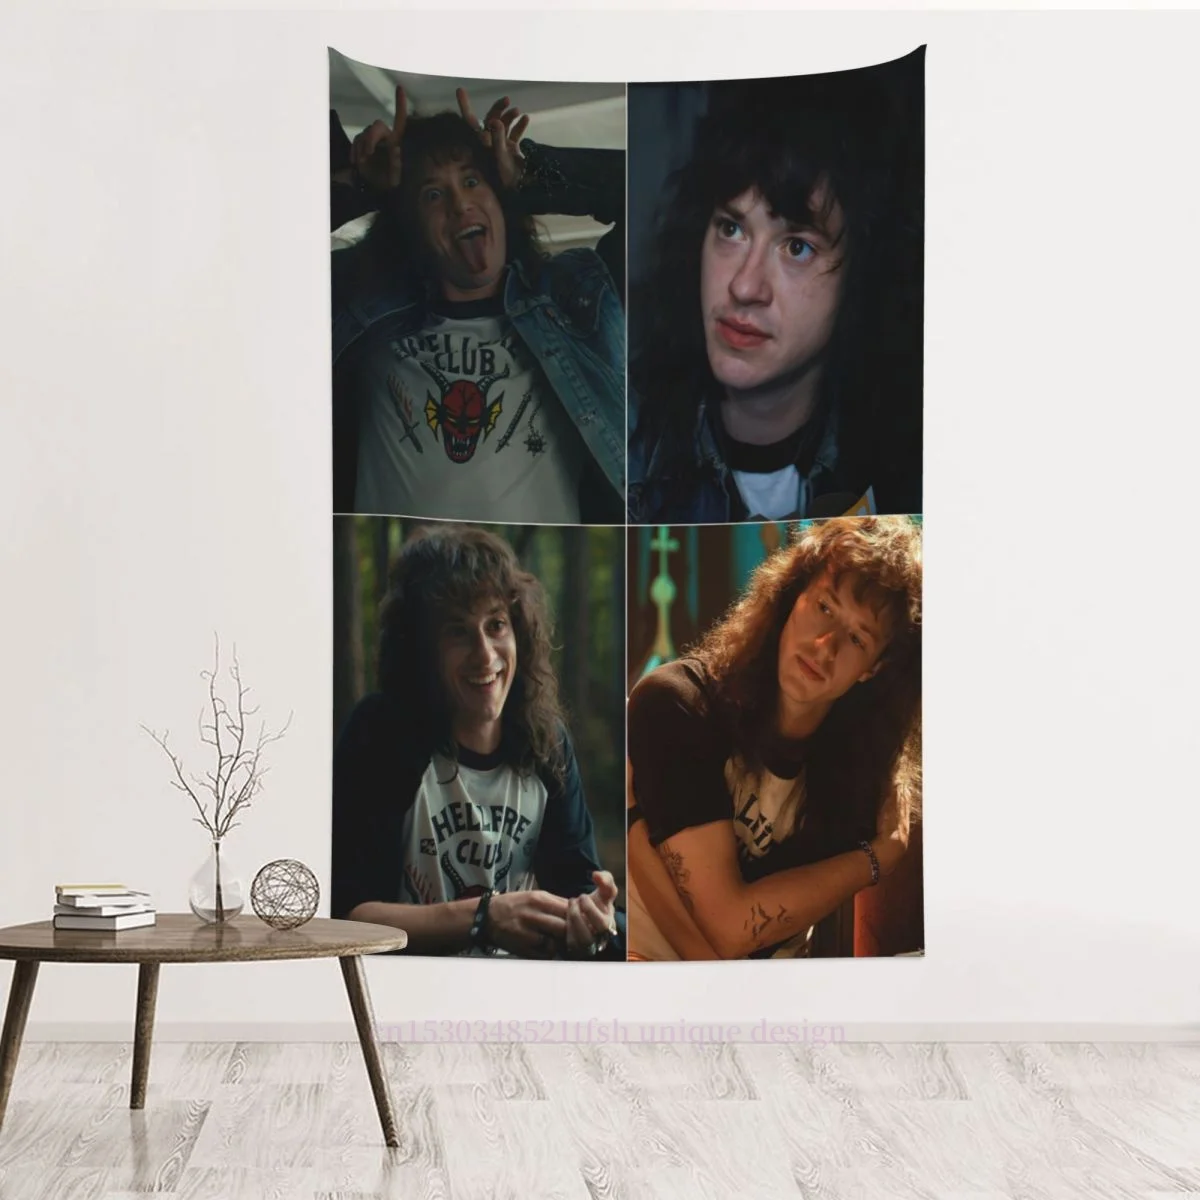 

Eddie Munson Stranger Things Cloth Large Tapestry Wall Hanging Home Room Decor Aesthetic Decoration